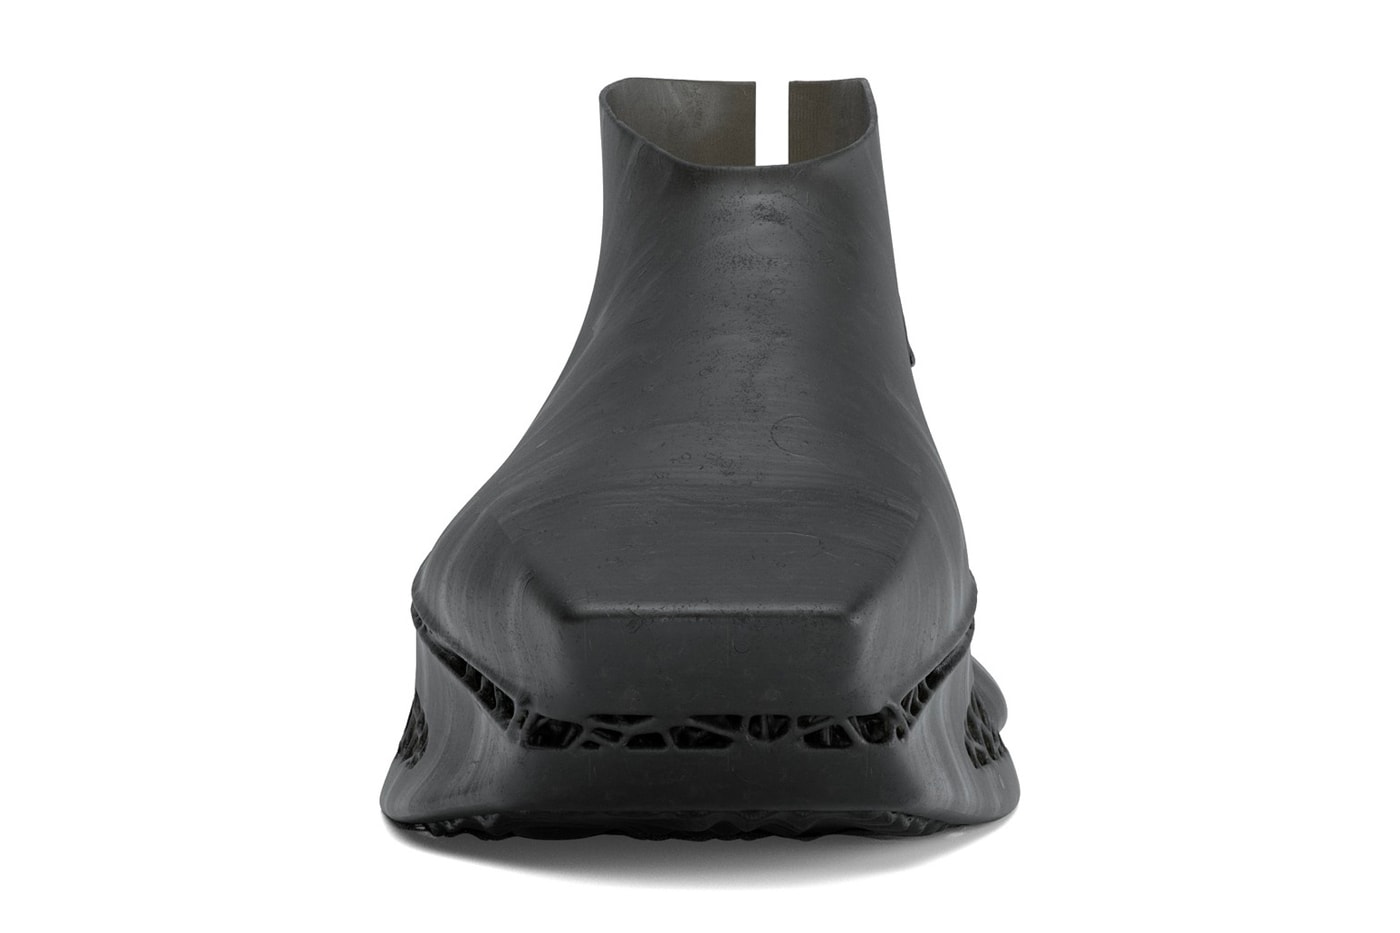 SCRY 3d printing stela black basic erosion shoe collection toughness softness release info price 